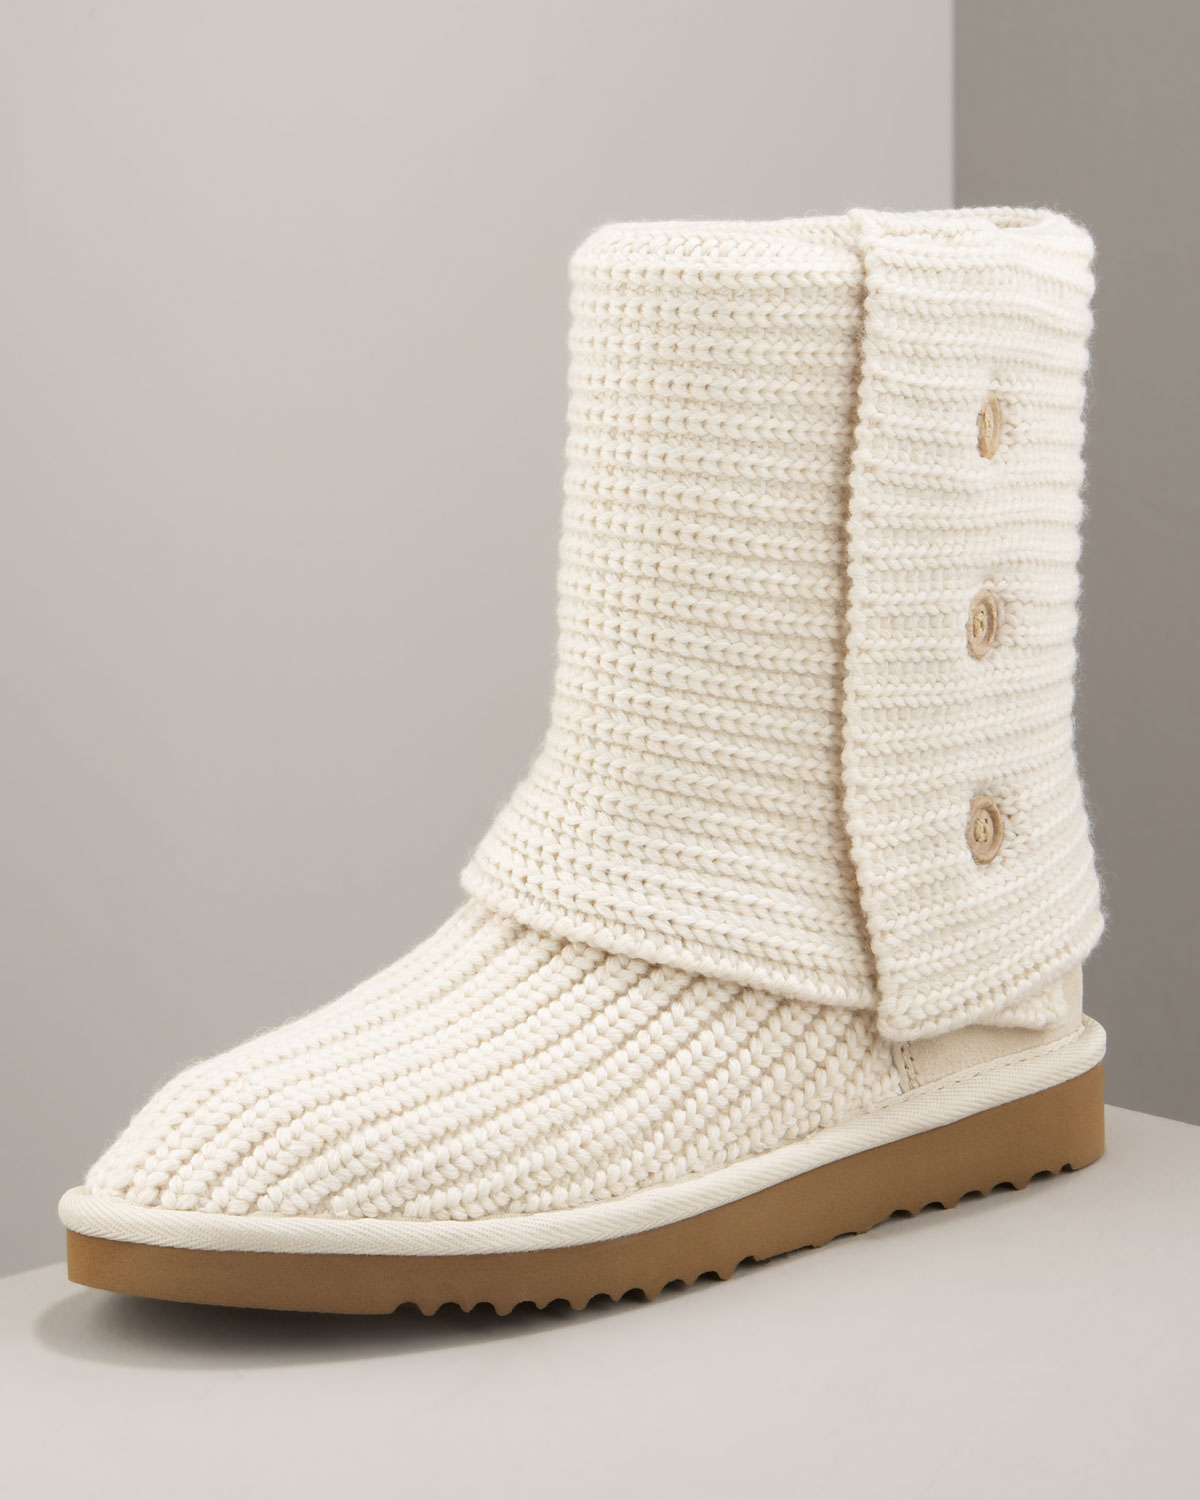 Lyst - Ugg Classic Cardy Crochet Boot Cream in Natural